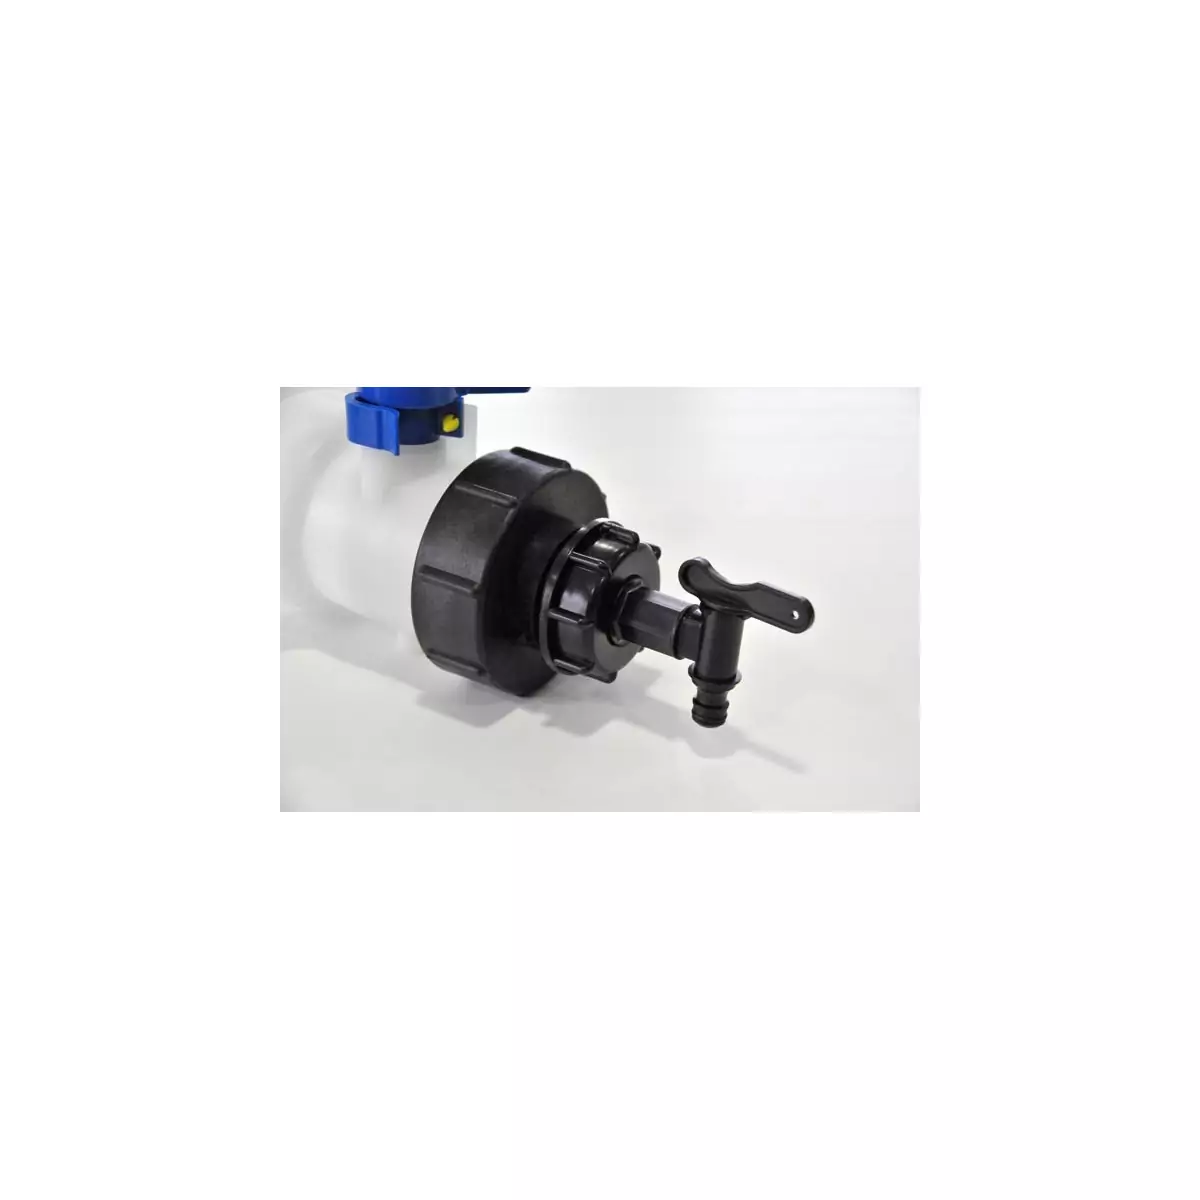 Product sheet Valve connection for S100x8 valve